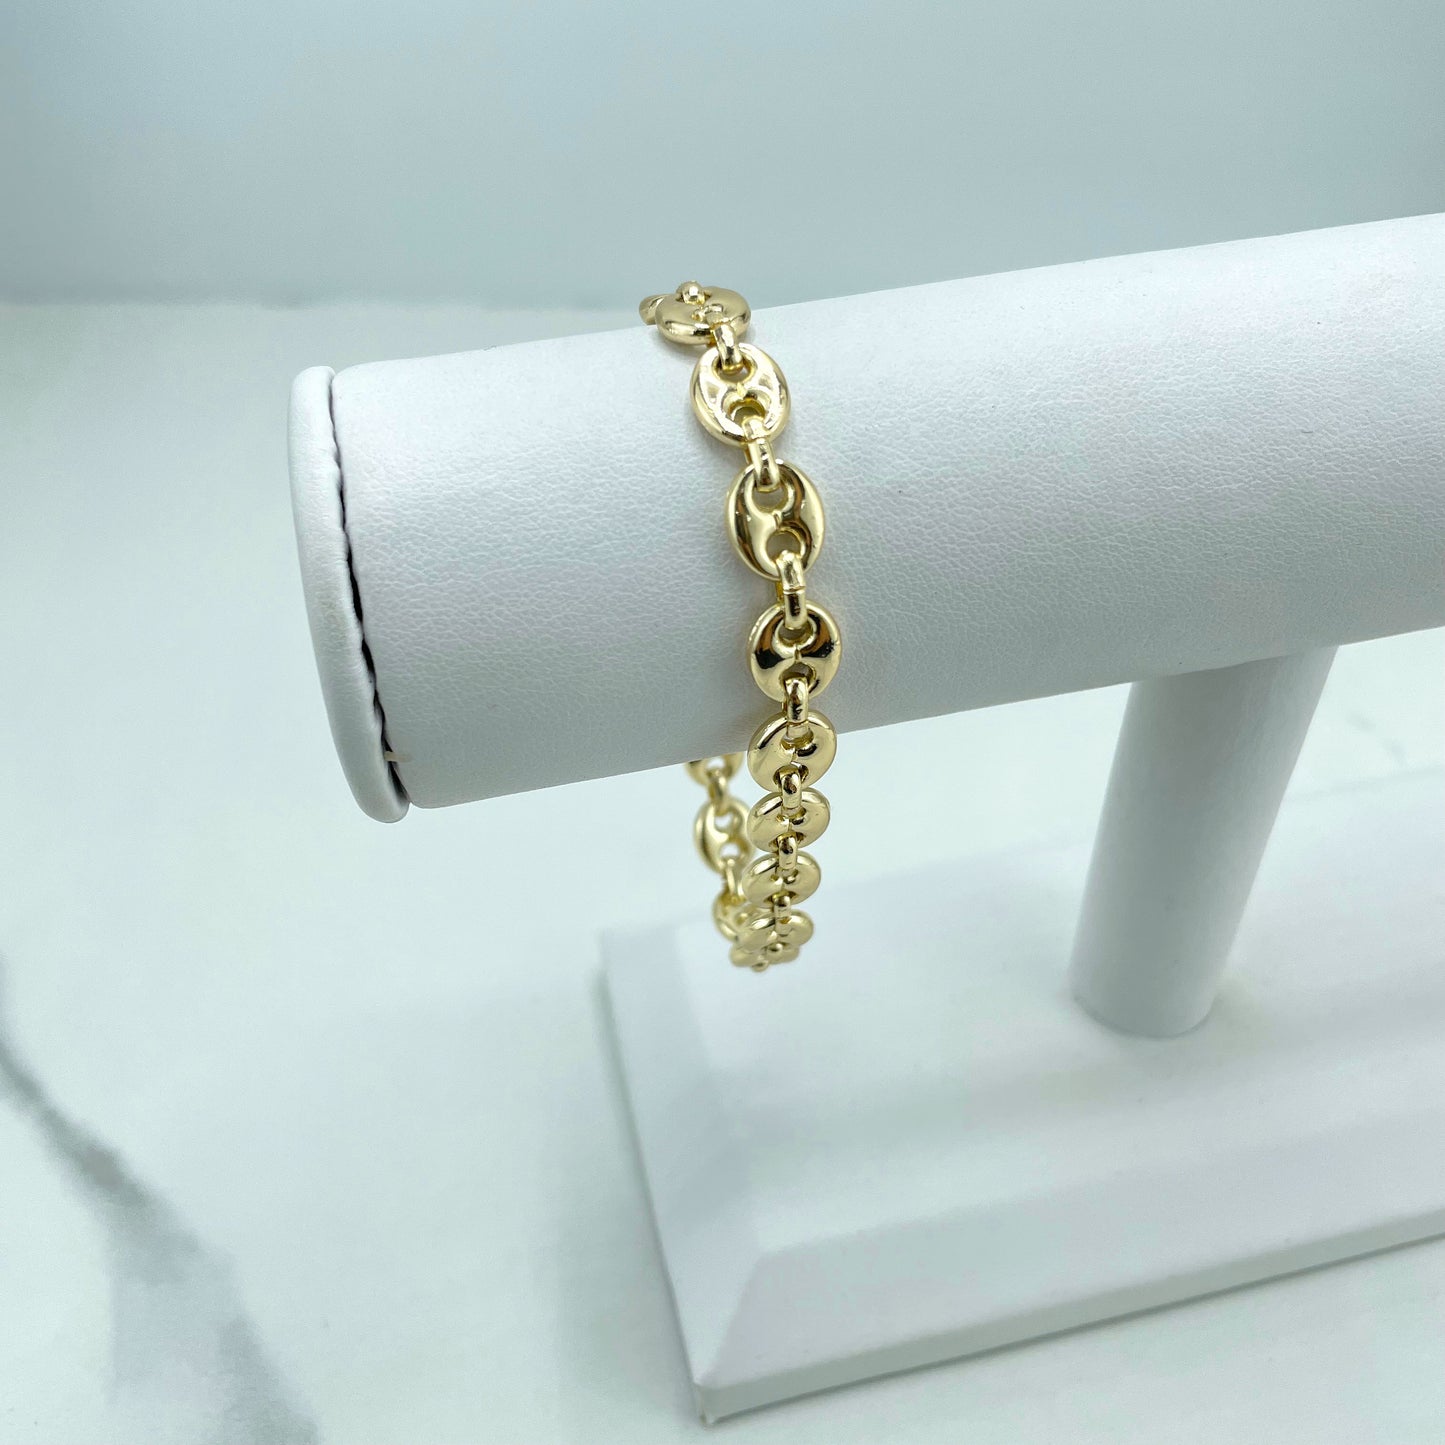 18k Gold Filled 8mm Specialty Puff Puffed Mariner Link Chain or Bracelet , Wholesale Jewelry Making Supplies